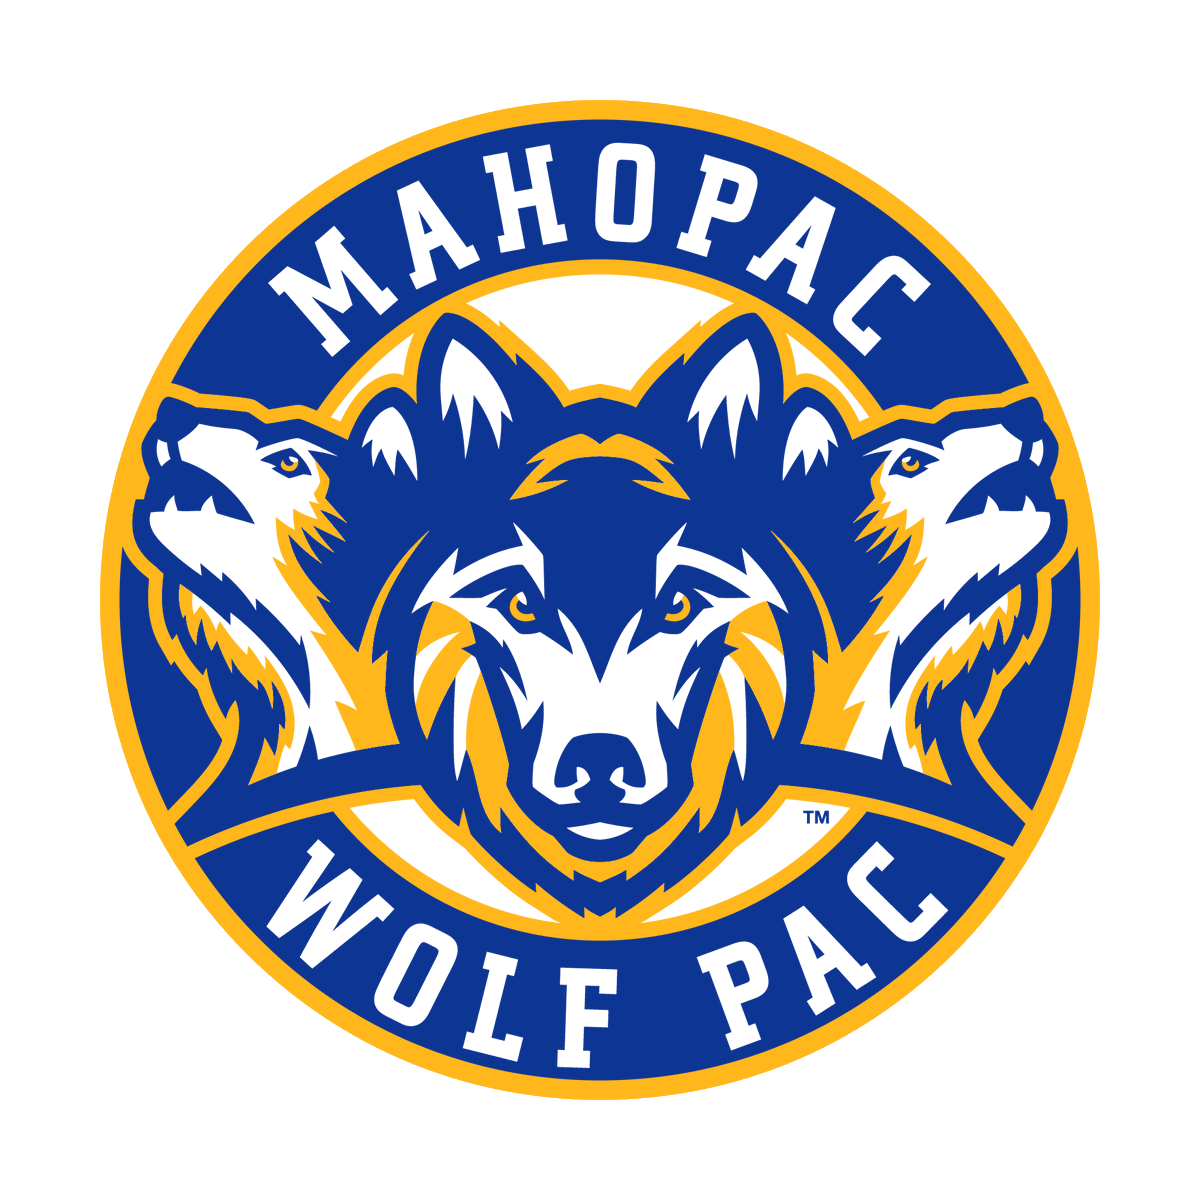 Due to the impending winter storm, the Mahopac Central School District will be closed tomorrow, February 13, 2024. Thank you and be safe.